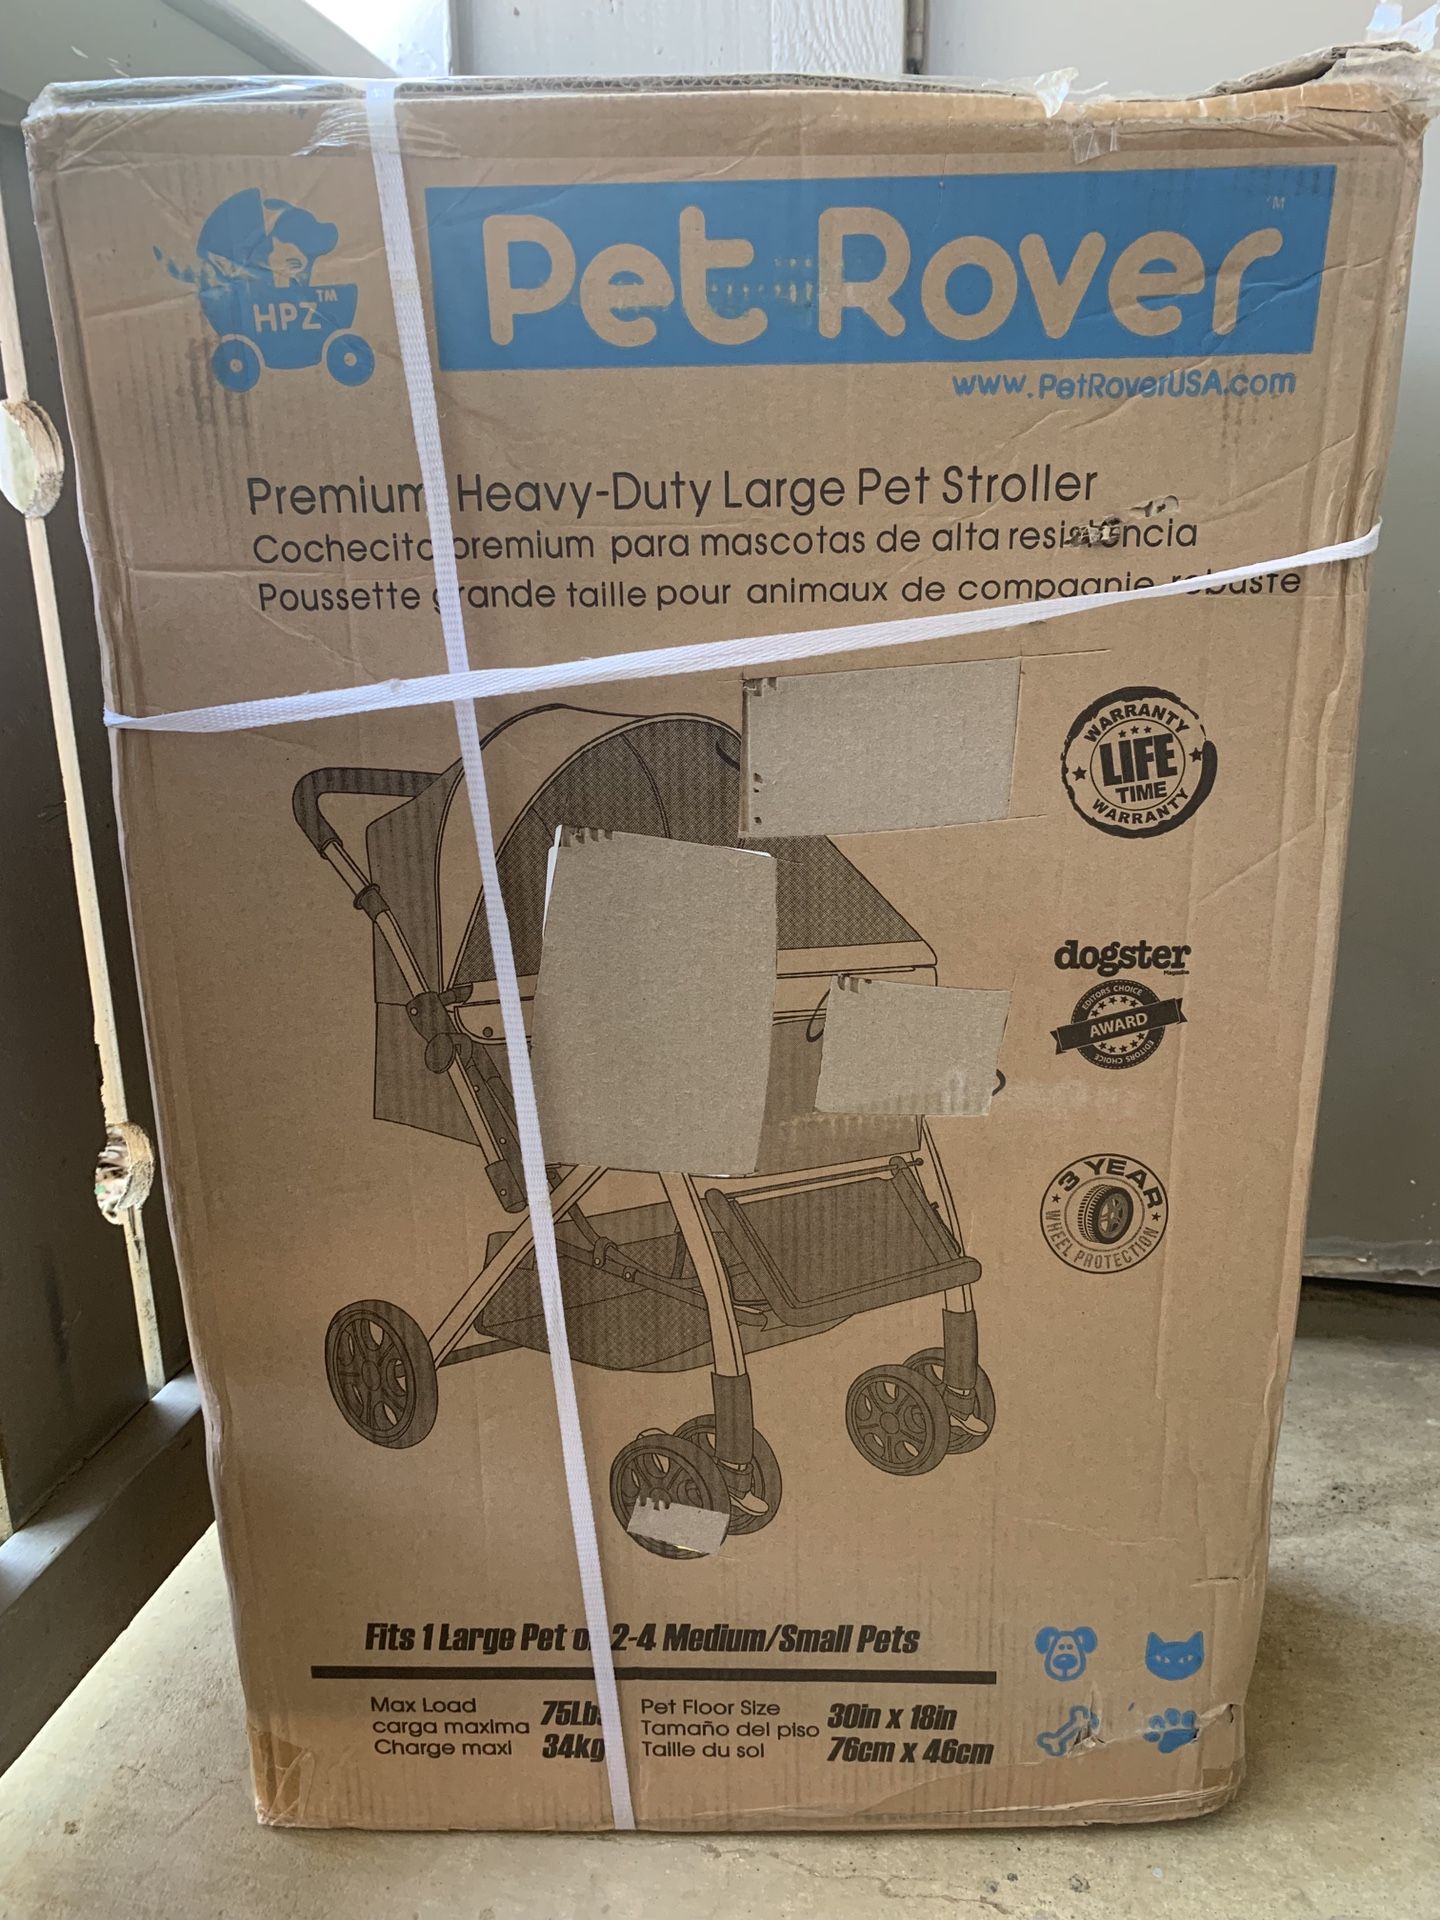 New HPZ™ PET ROVER XL Extra-Long Premium Stroller For Small/Medium/Large Dogs, Cats And Pets (2nd Gen.)